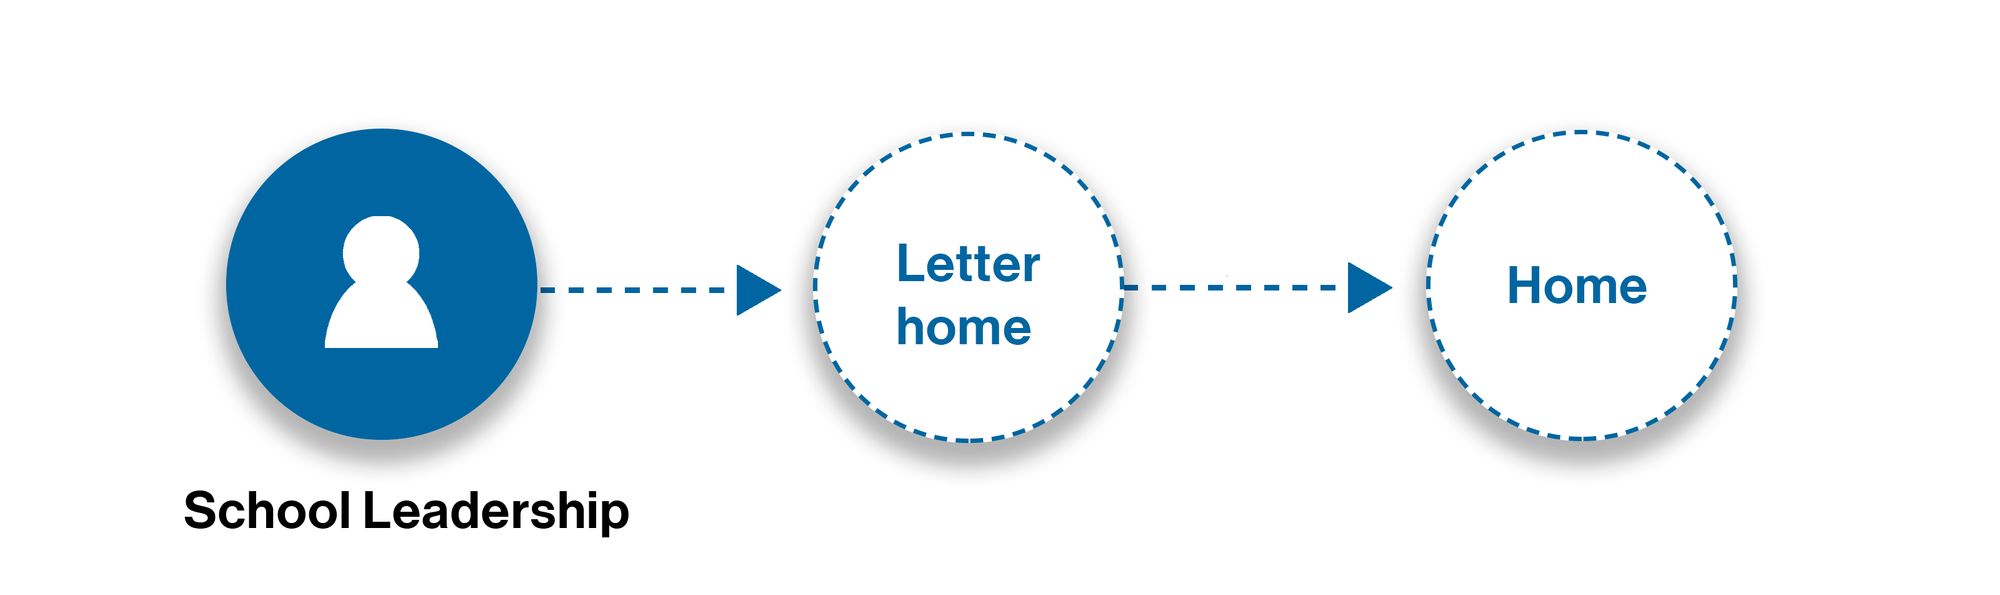 School leadership points to letter home points to home